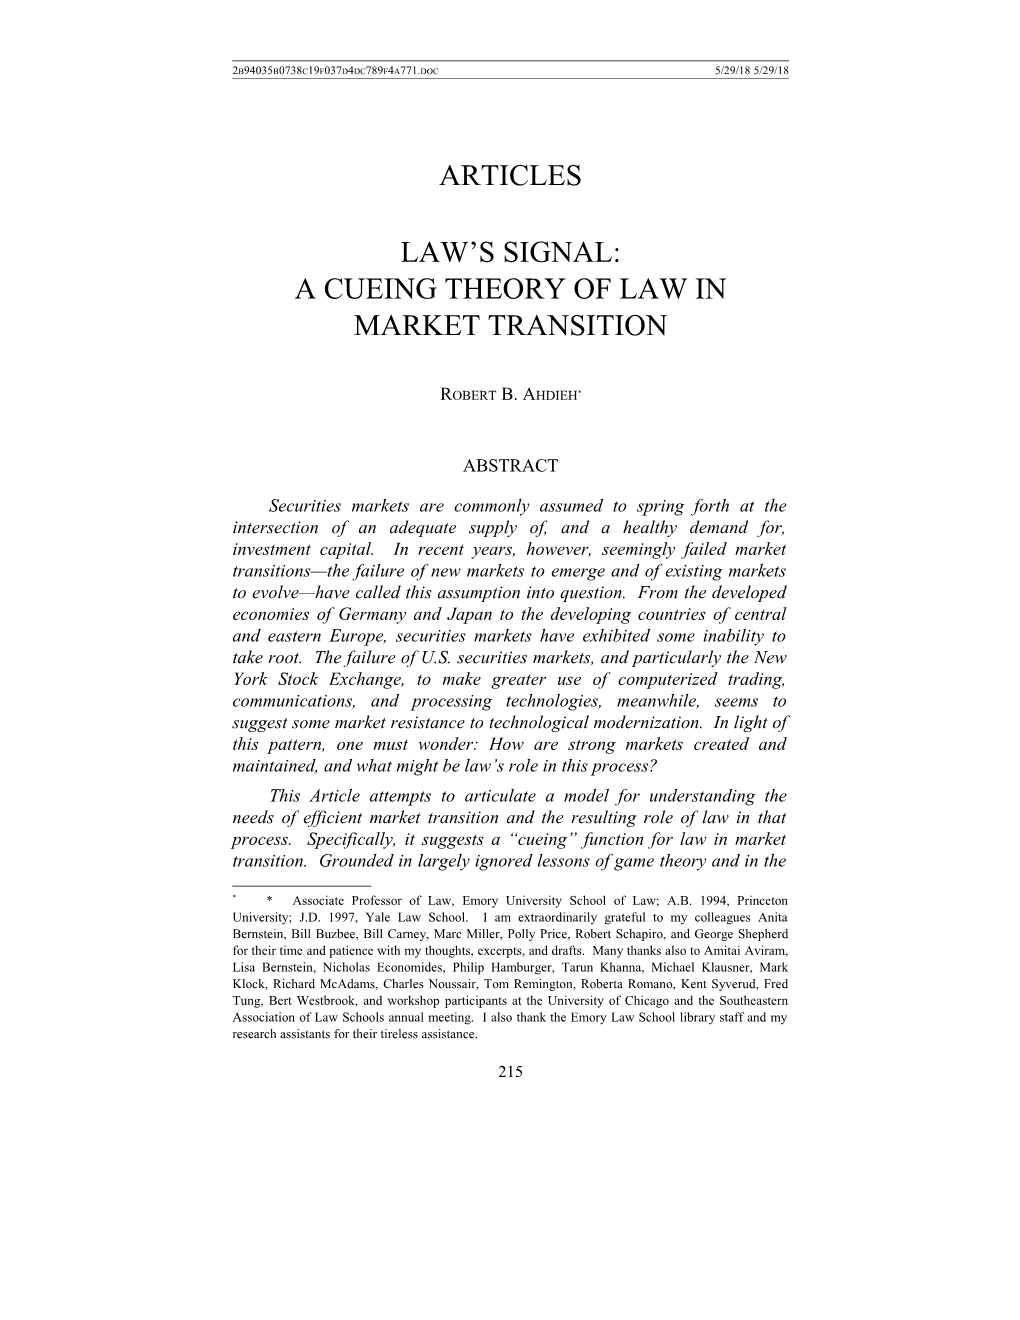 Law S Signal: a Cueing Theory of Law in Market Transition